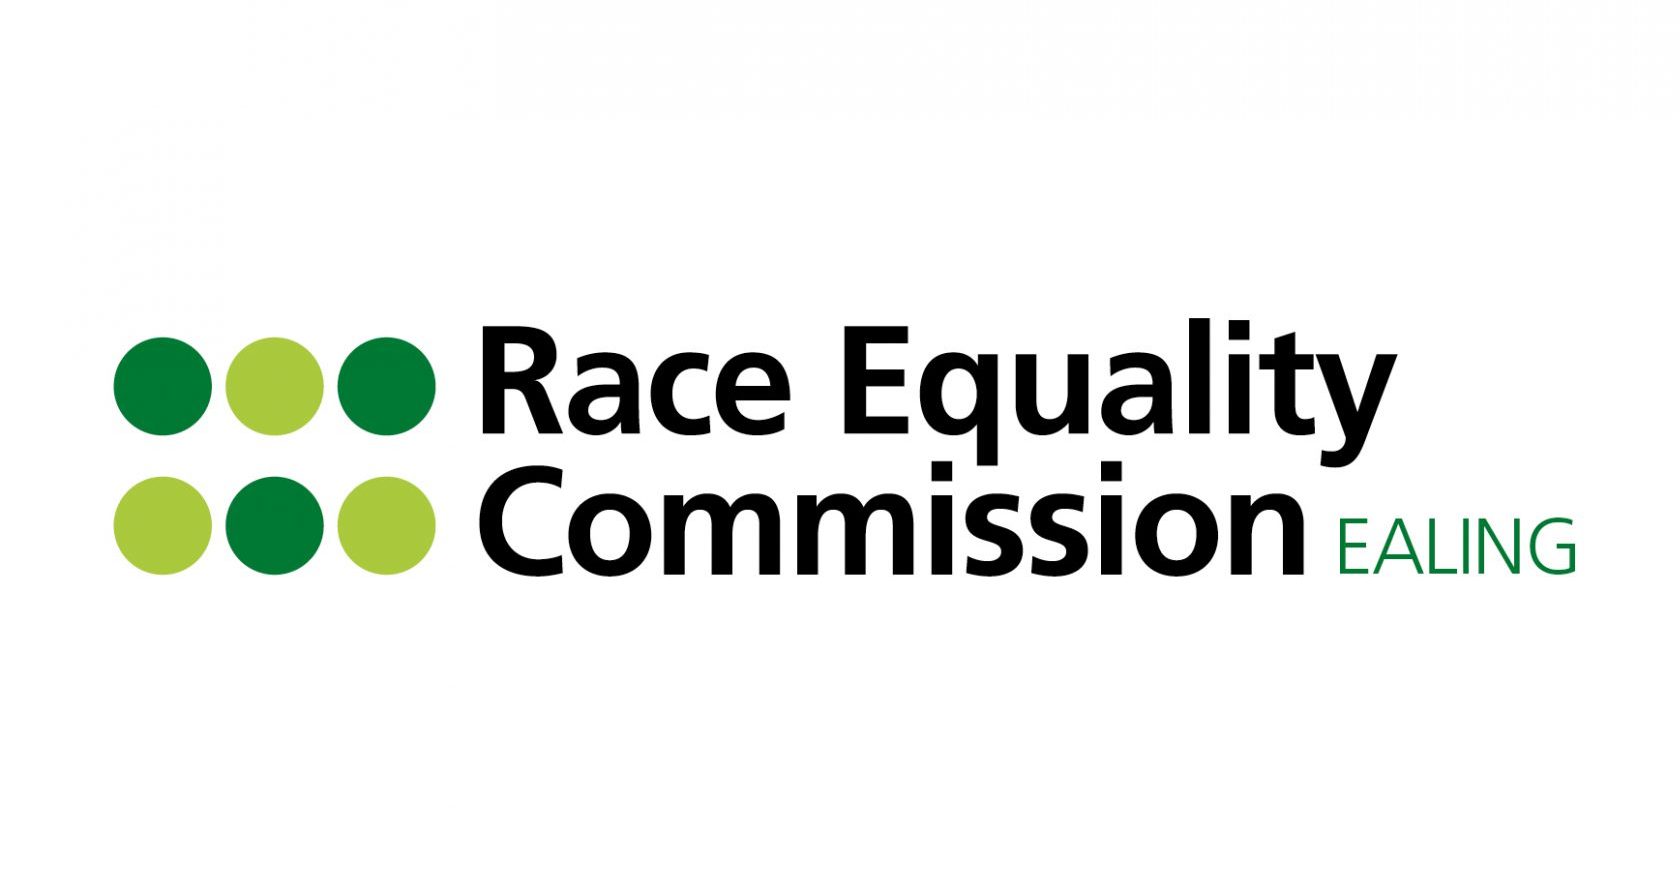 Race Equality Commission image